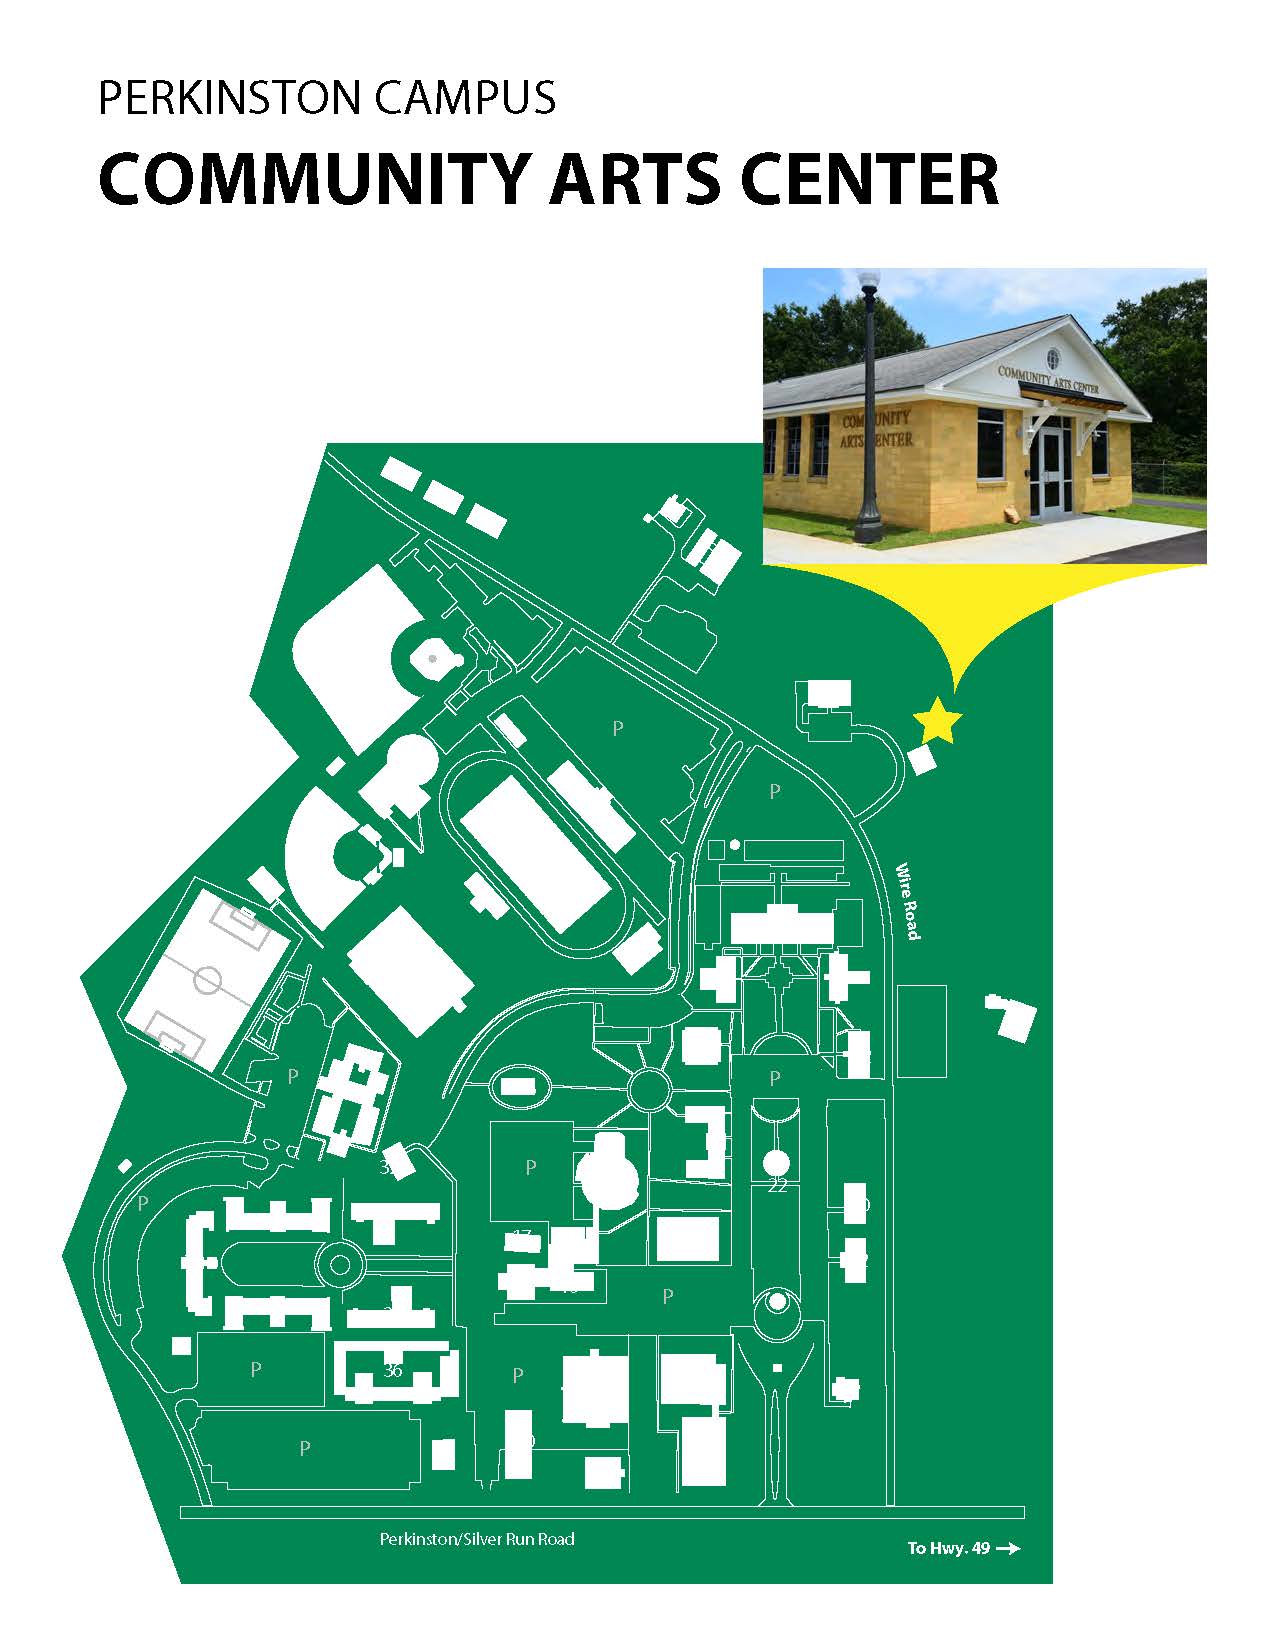 Map of Perk Campus showing location of Community Arts Center